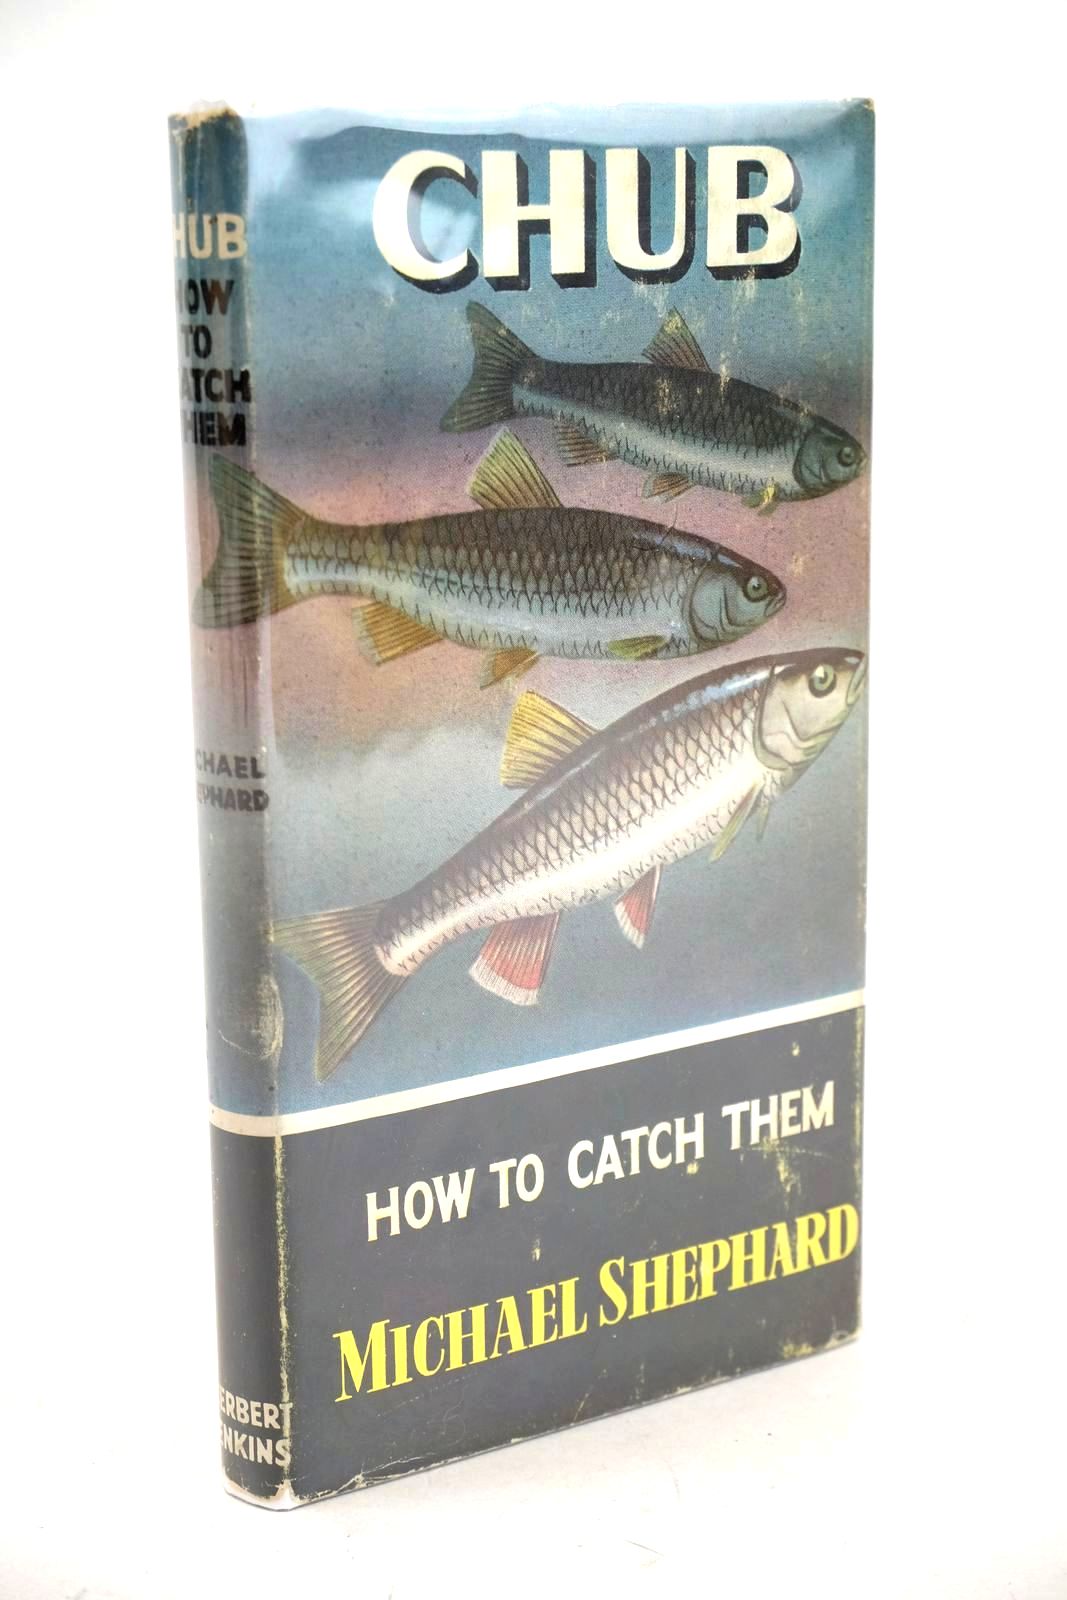 Fly Fishing For Coarse Fish - Book